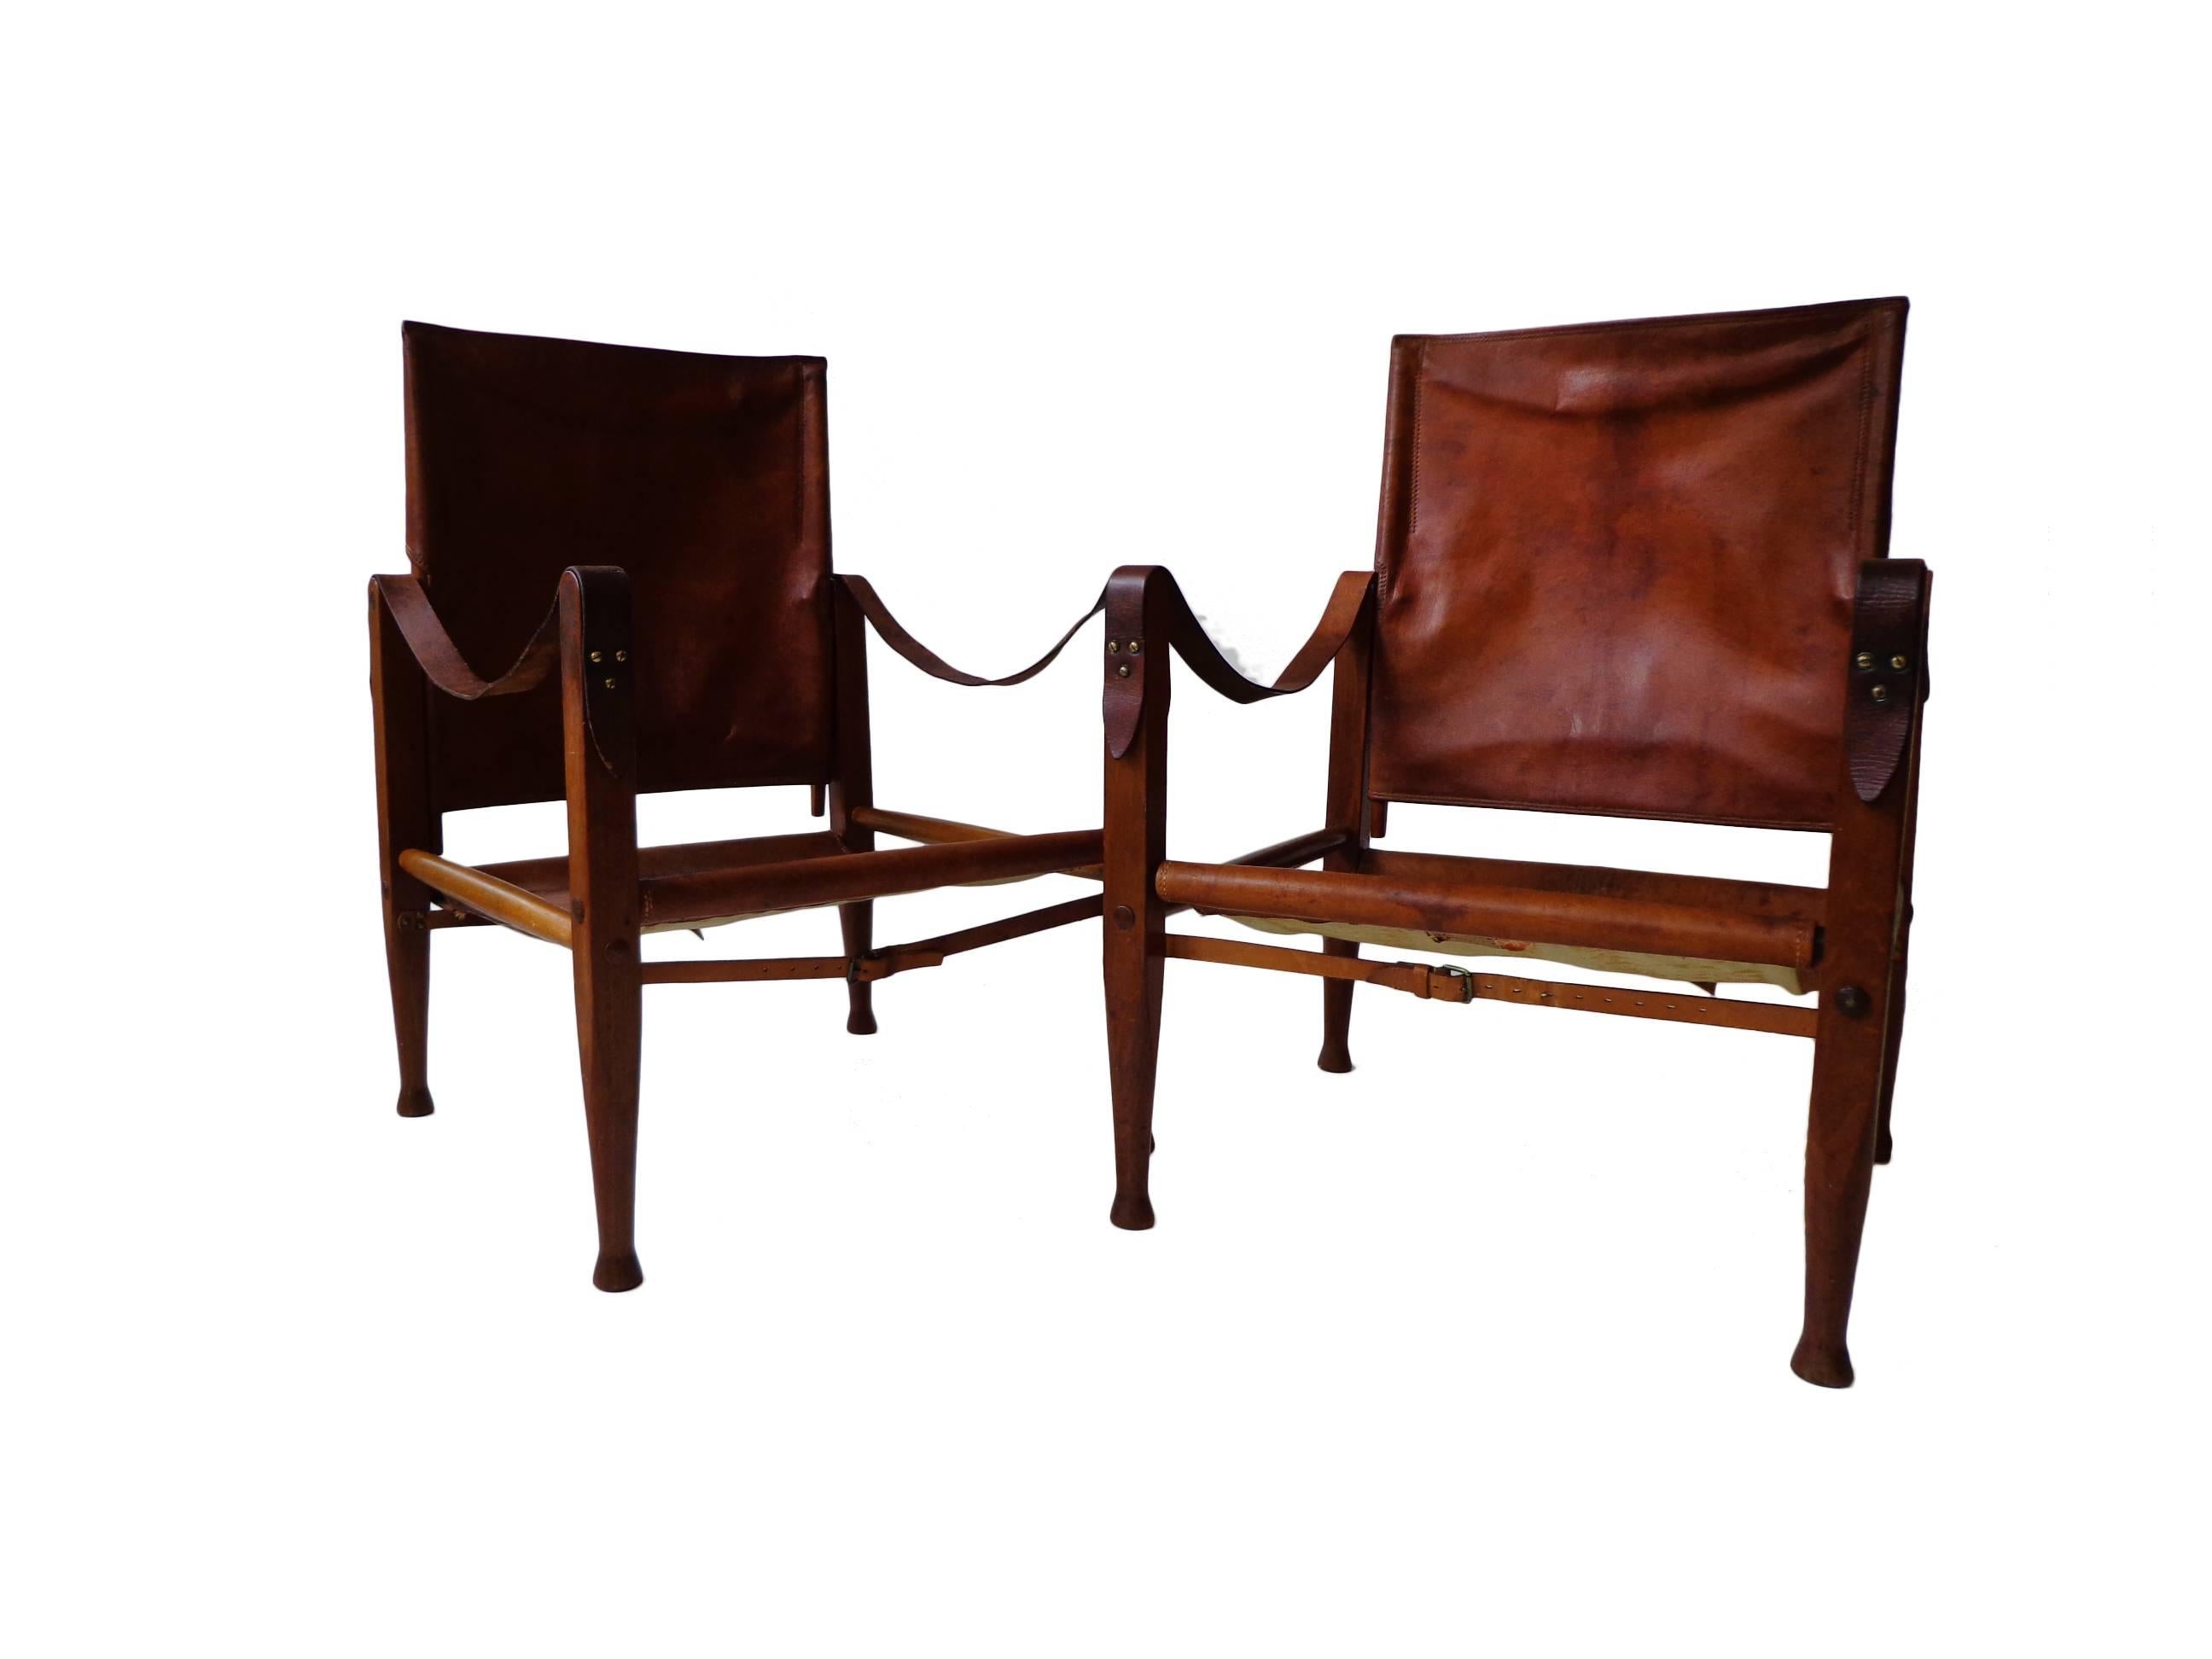 Offerd by Zitzo, Amsterdam: A pair of stained ash "Safari chairs". Seat, back, armrests in original patinated cognac niger leather and brass details. Designed 1933.
Signed with early applied manufacturer's label to each